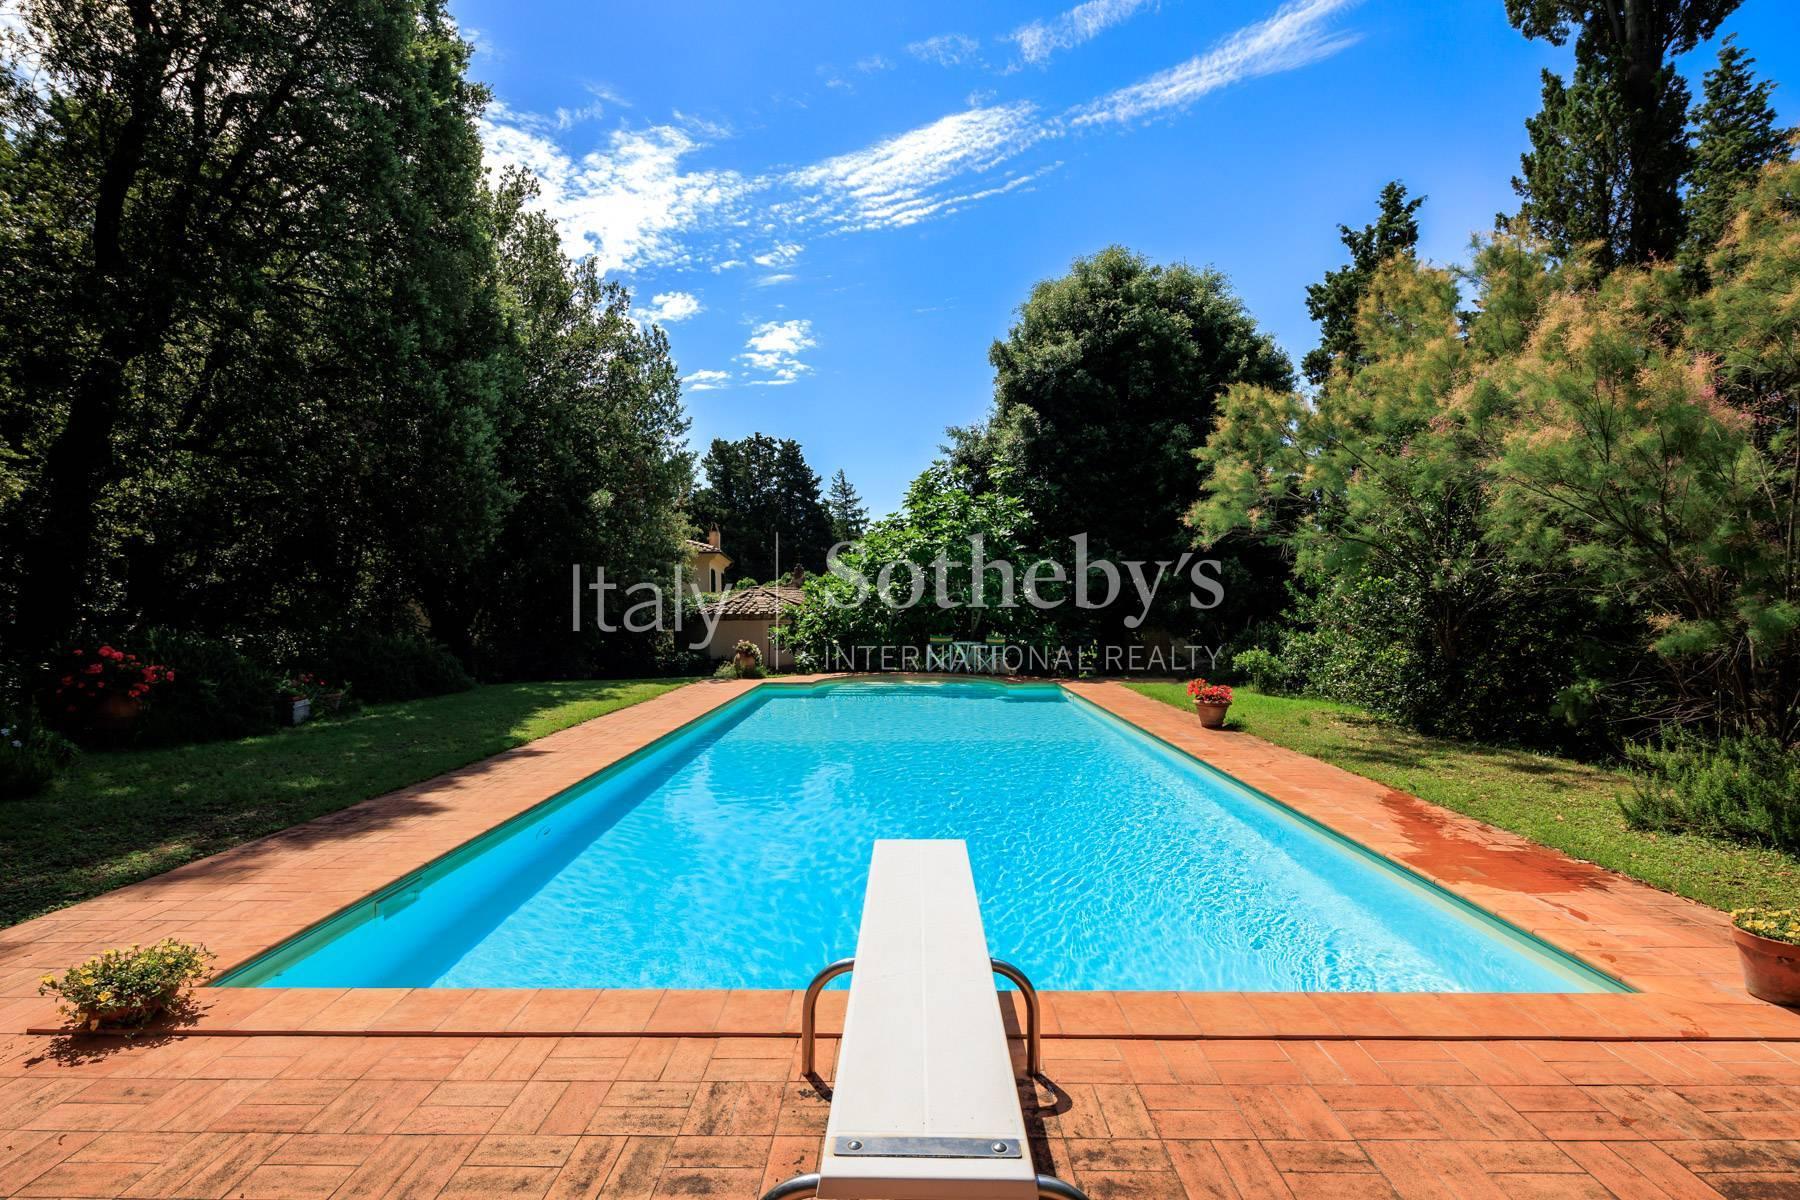 Stunning Villa in the Tuscan countryside close to Maremma - 7